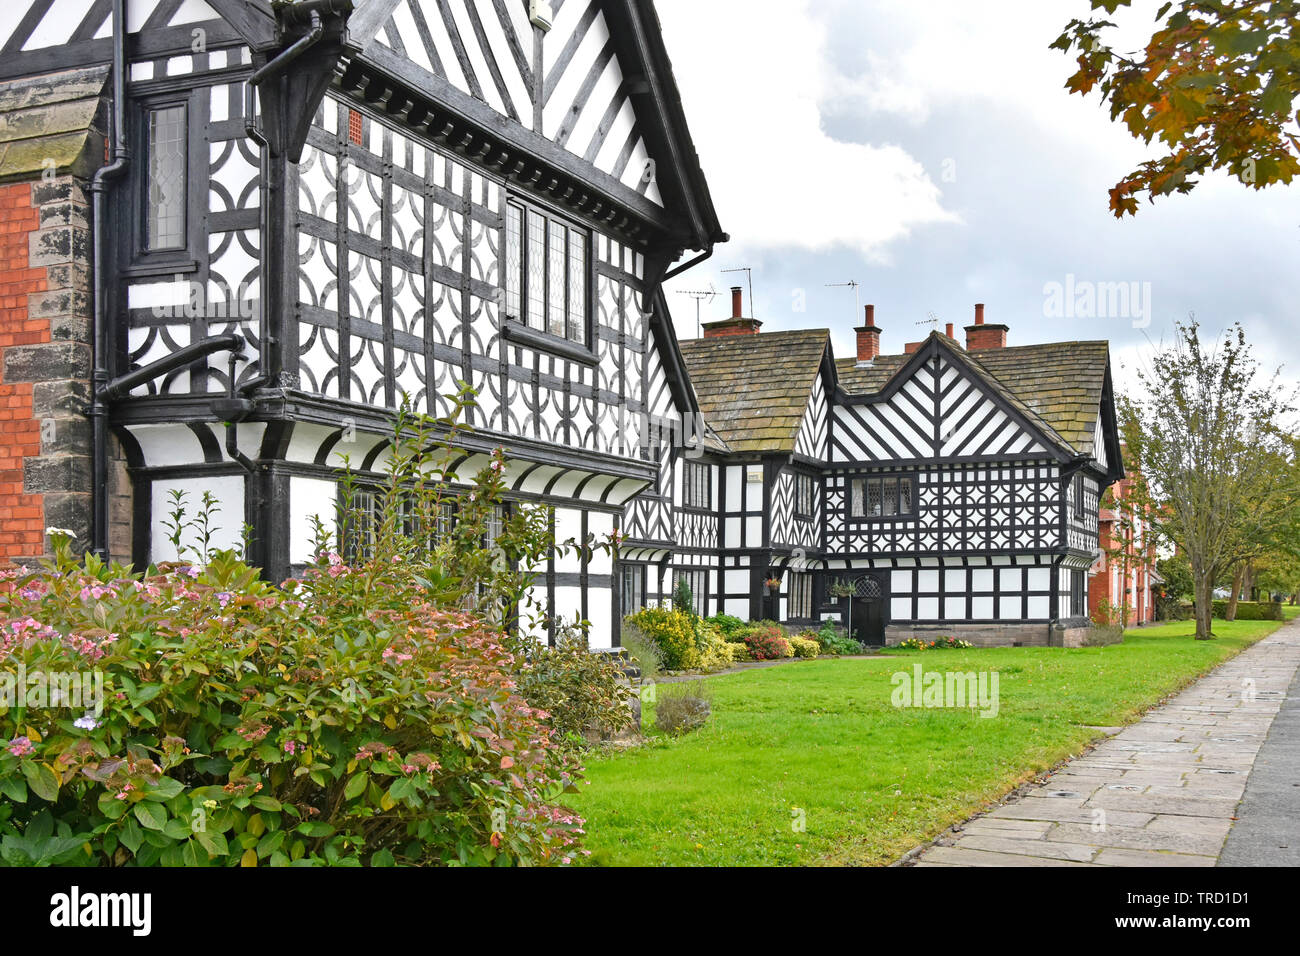 Black & White homes in Port Sunlight landscaped model village housing built by Lever Brothers to house factory workers Wirral Merseyside England UK Stock Photo